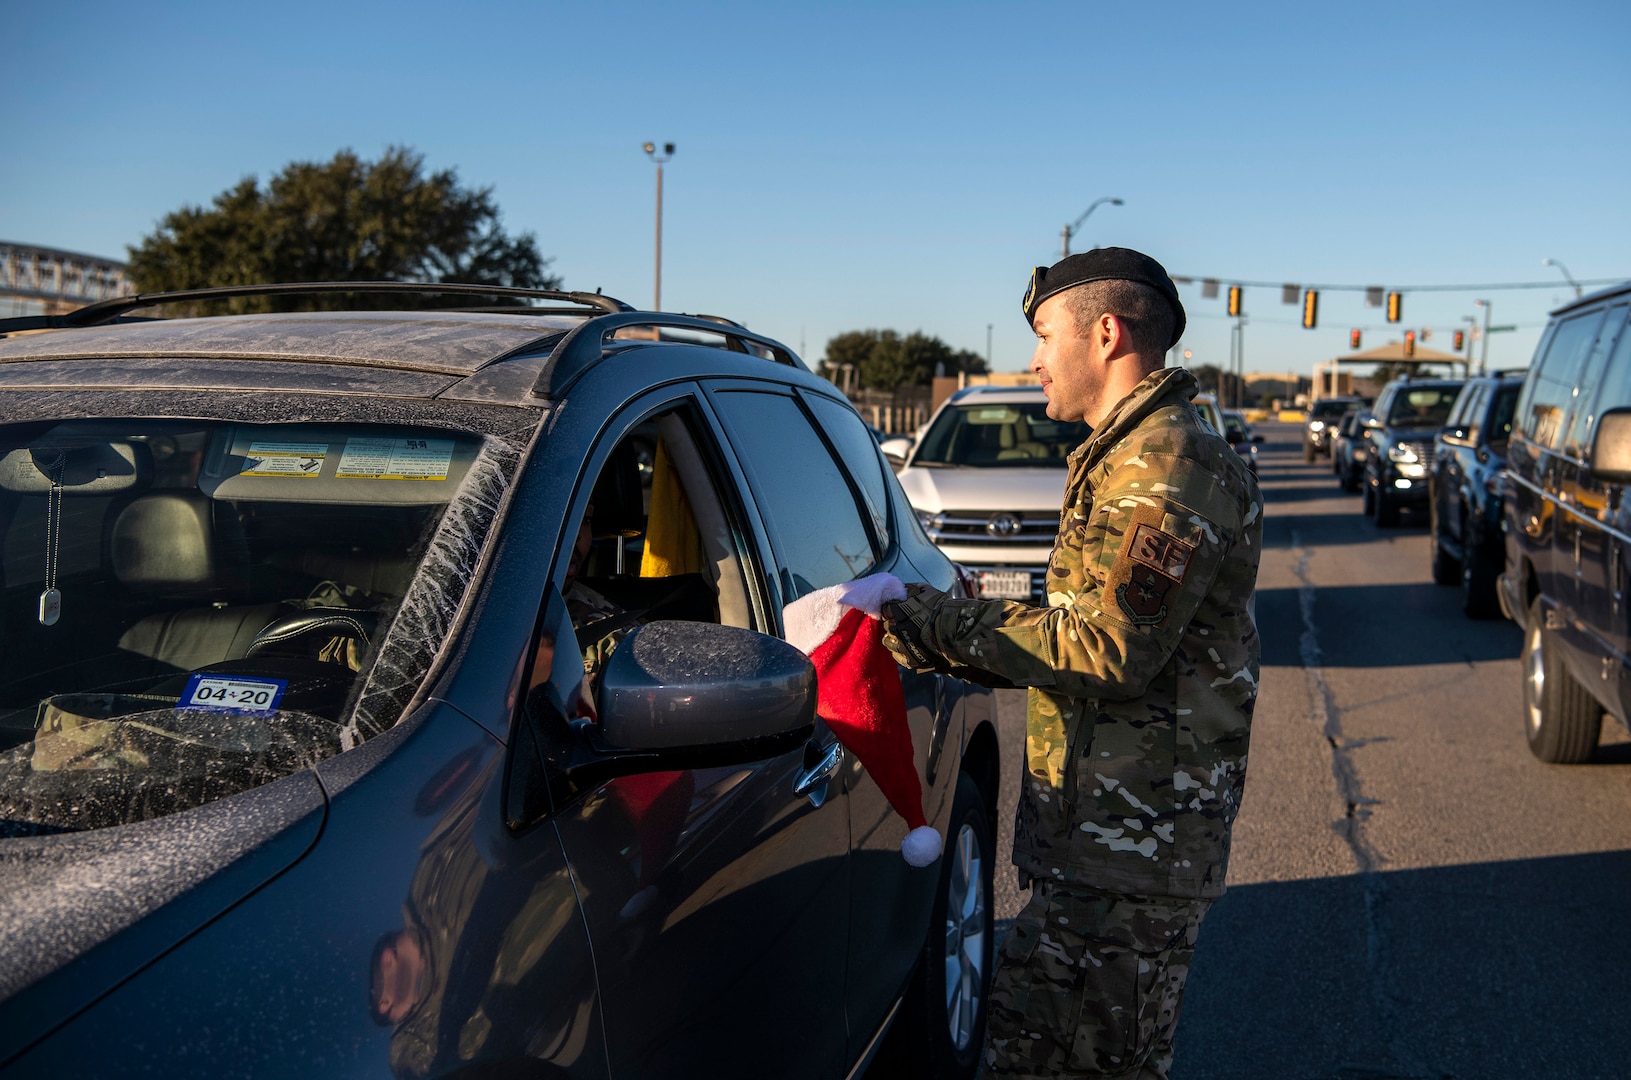 Capt. Jason Mag, 837th Training Squadron, hands out a candy cane during the morning inbound commute in support of the 37th Training Wing new initiative, “We Care,” at Joint Base San Antonio-Lackland, Texas, Dec. 18, 2019. The initiative involved 37th Training Wing military and civilian members spending the morning at various gates letting each person know that they stand together in support of those struggling with depression and thoughts of suicide by holding a positive message of support and handing out over 400 candy canes. If you are struggling with thoughts of suicide, please go directly to the Mental Health Clinic or to your closest Emergency Room. You can also reach the National Suicide Prevention Lifeline at 1-800-273-8255.